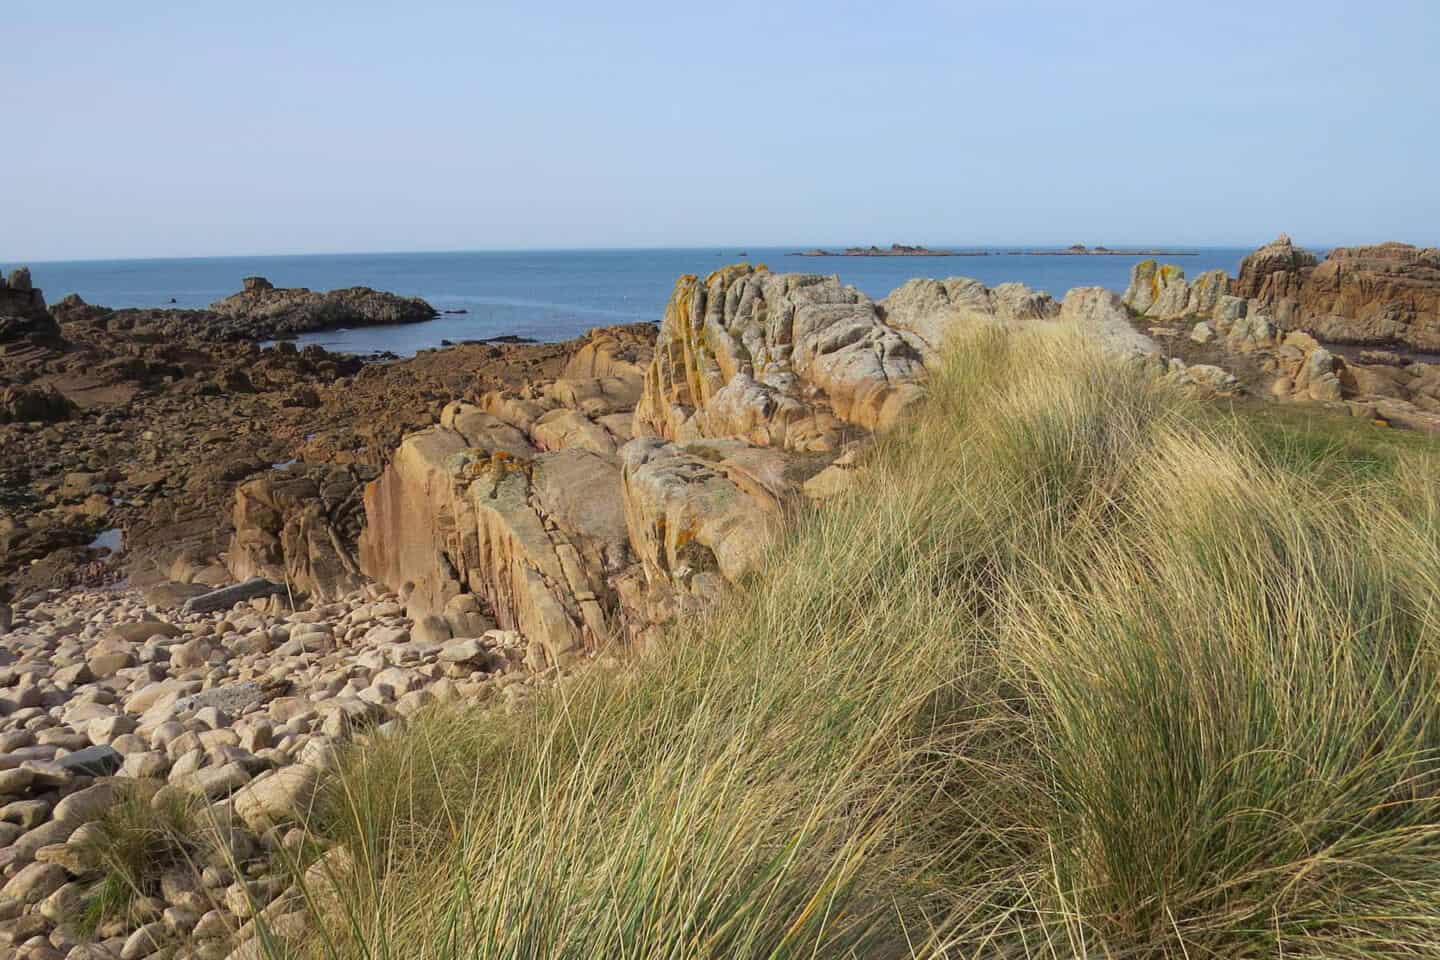 An image of a rugged rocky beach and sea grass provides inspiration for the biophilic home